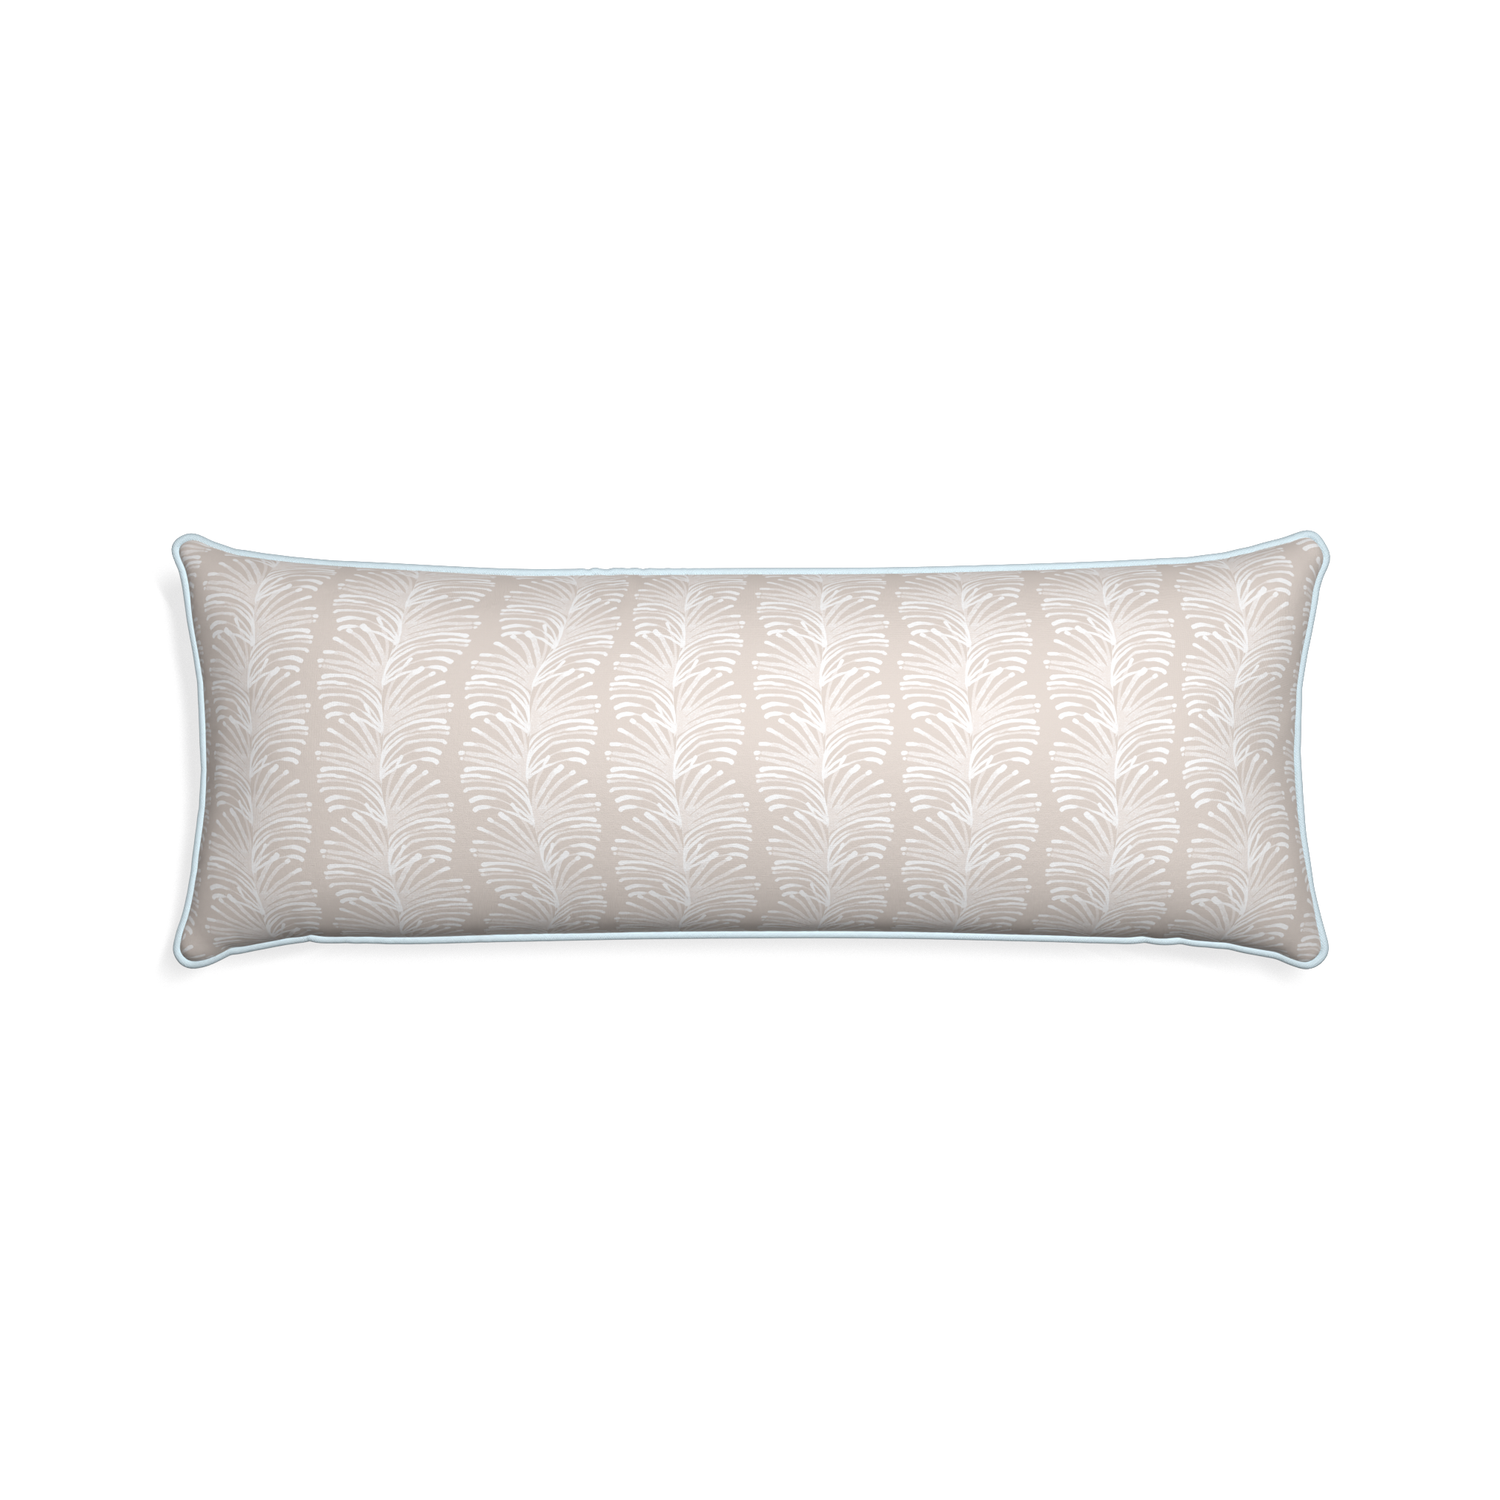 Xl-lumbar emma sand custom sand colored botanical stripepillow with powder piping on white background